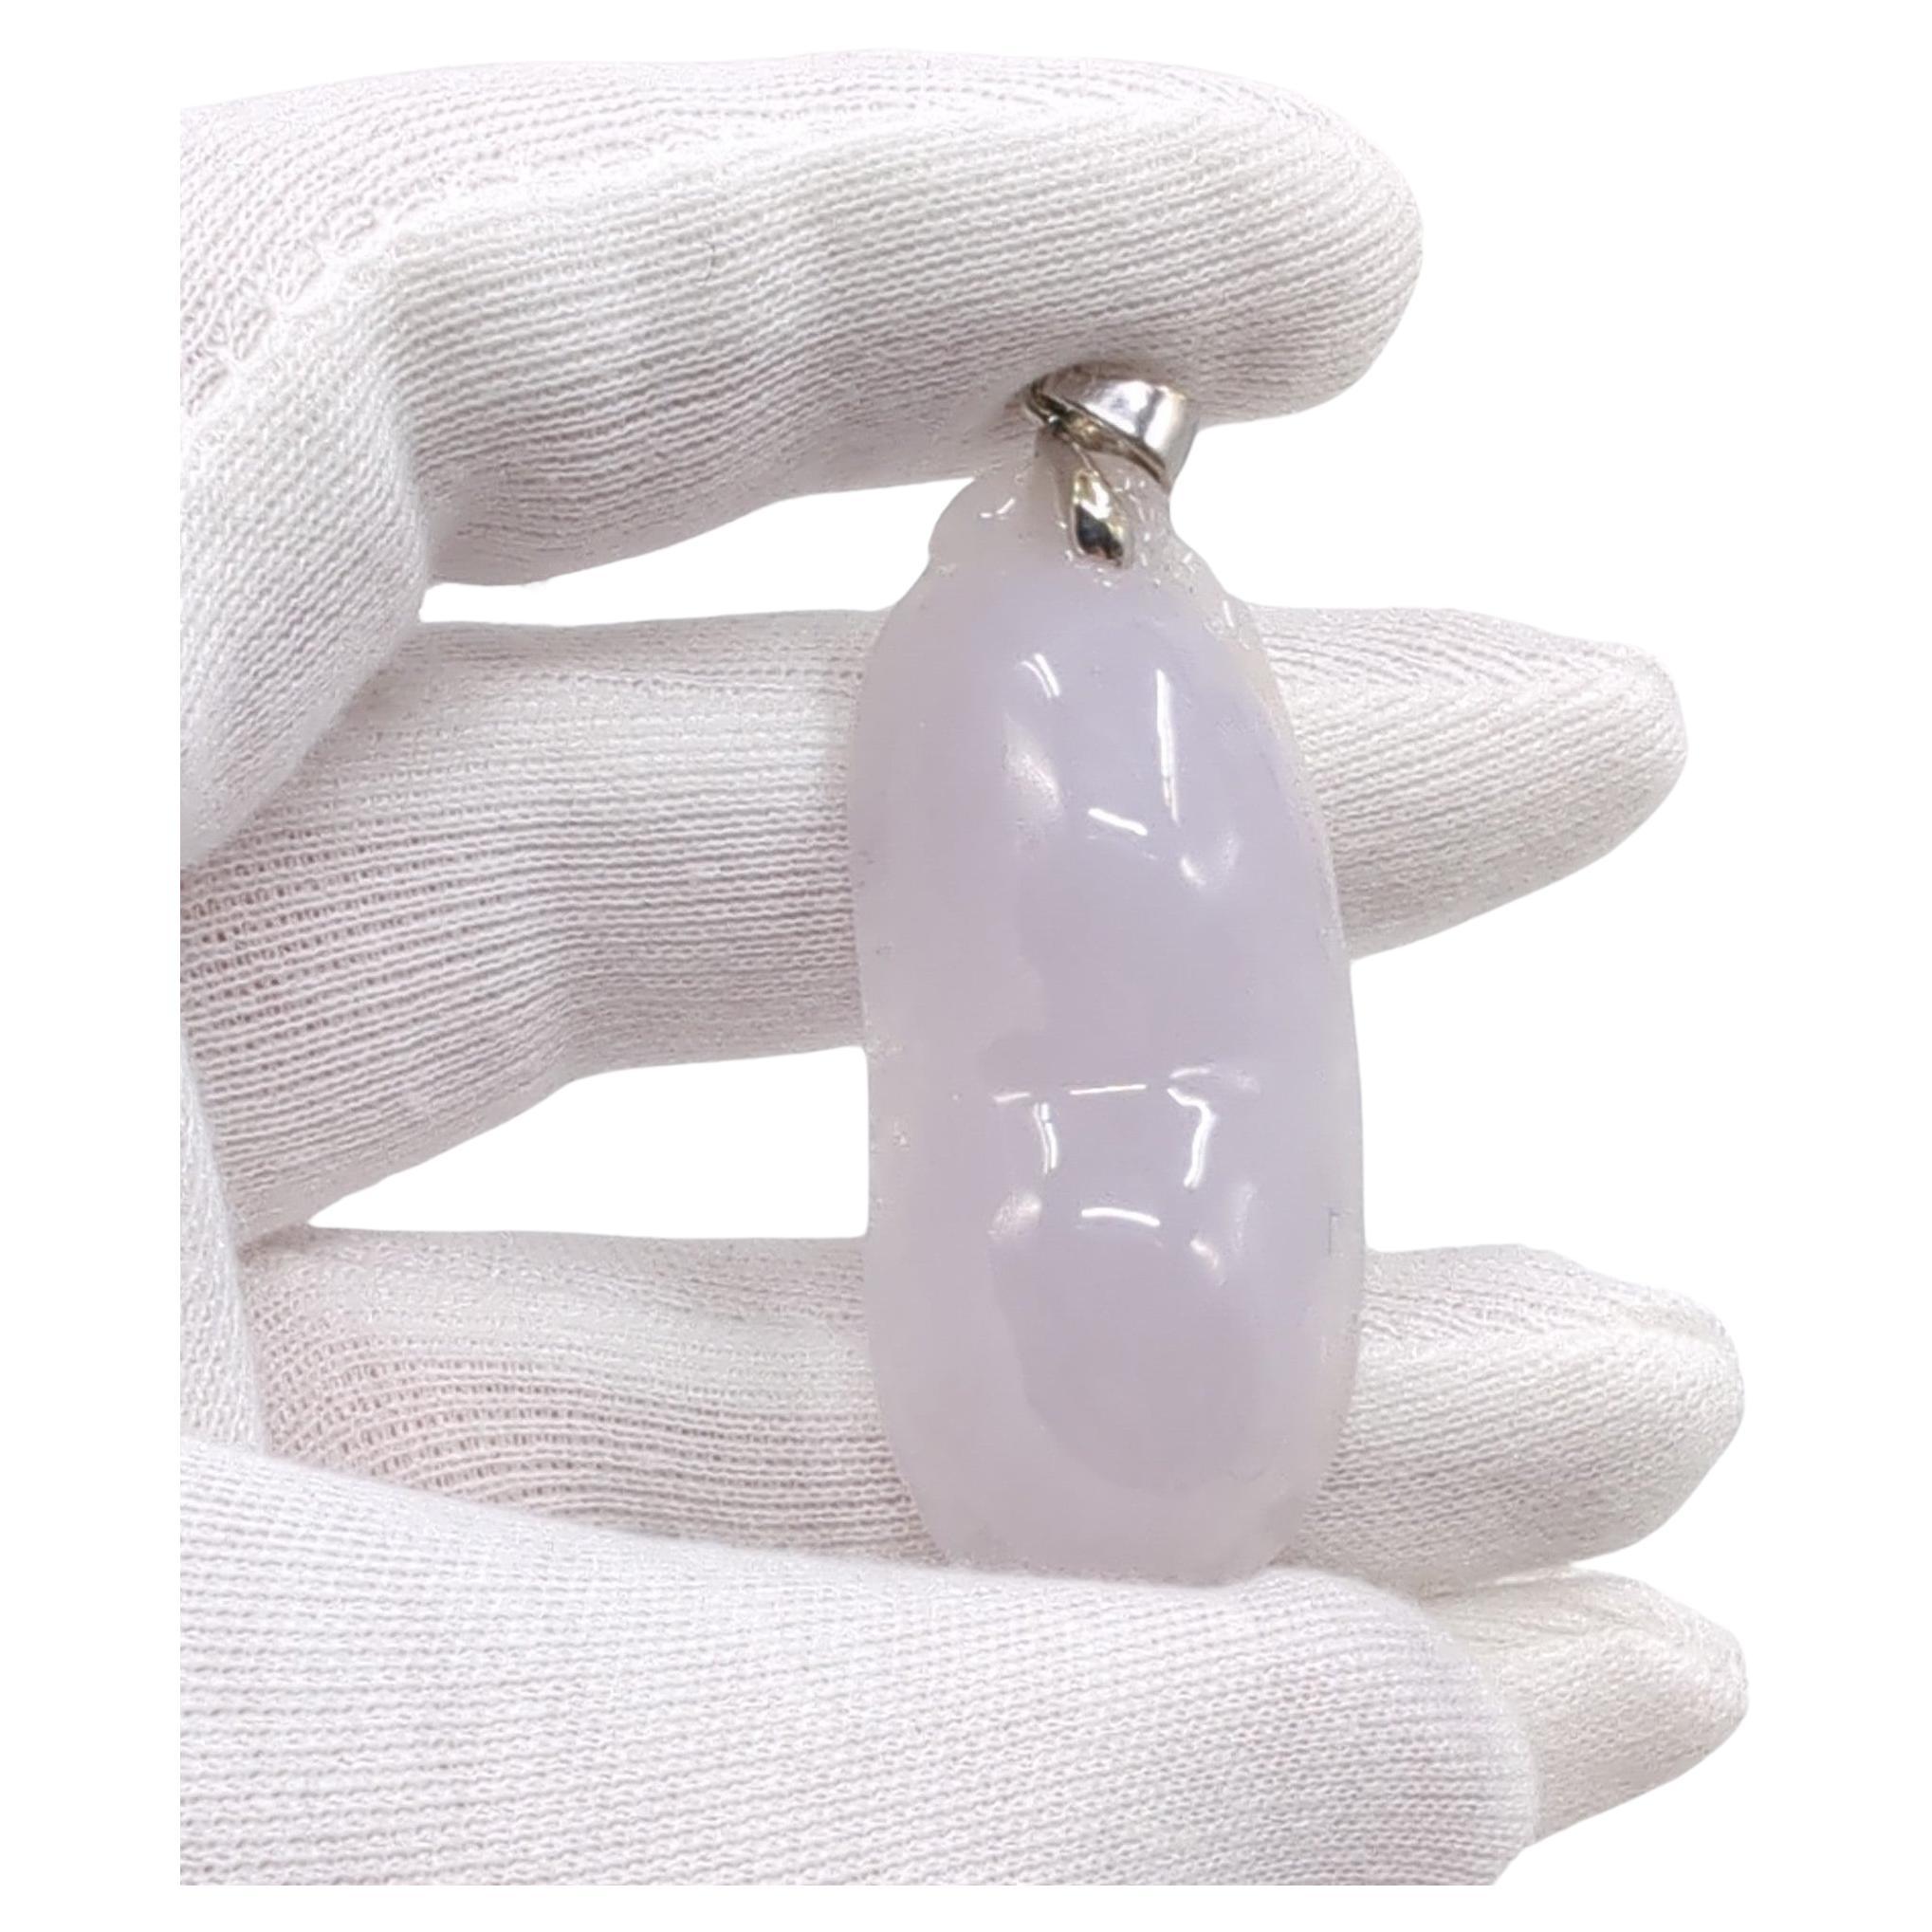 Large Chinese jadeite pendant, hand carved in the form of a pea pod. The highly translucent, polished icy jadeite is natural and untreated, and exhibits lovely faint hues of natural light lavender color. 

The white gold bale is hallmarked 18K